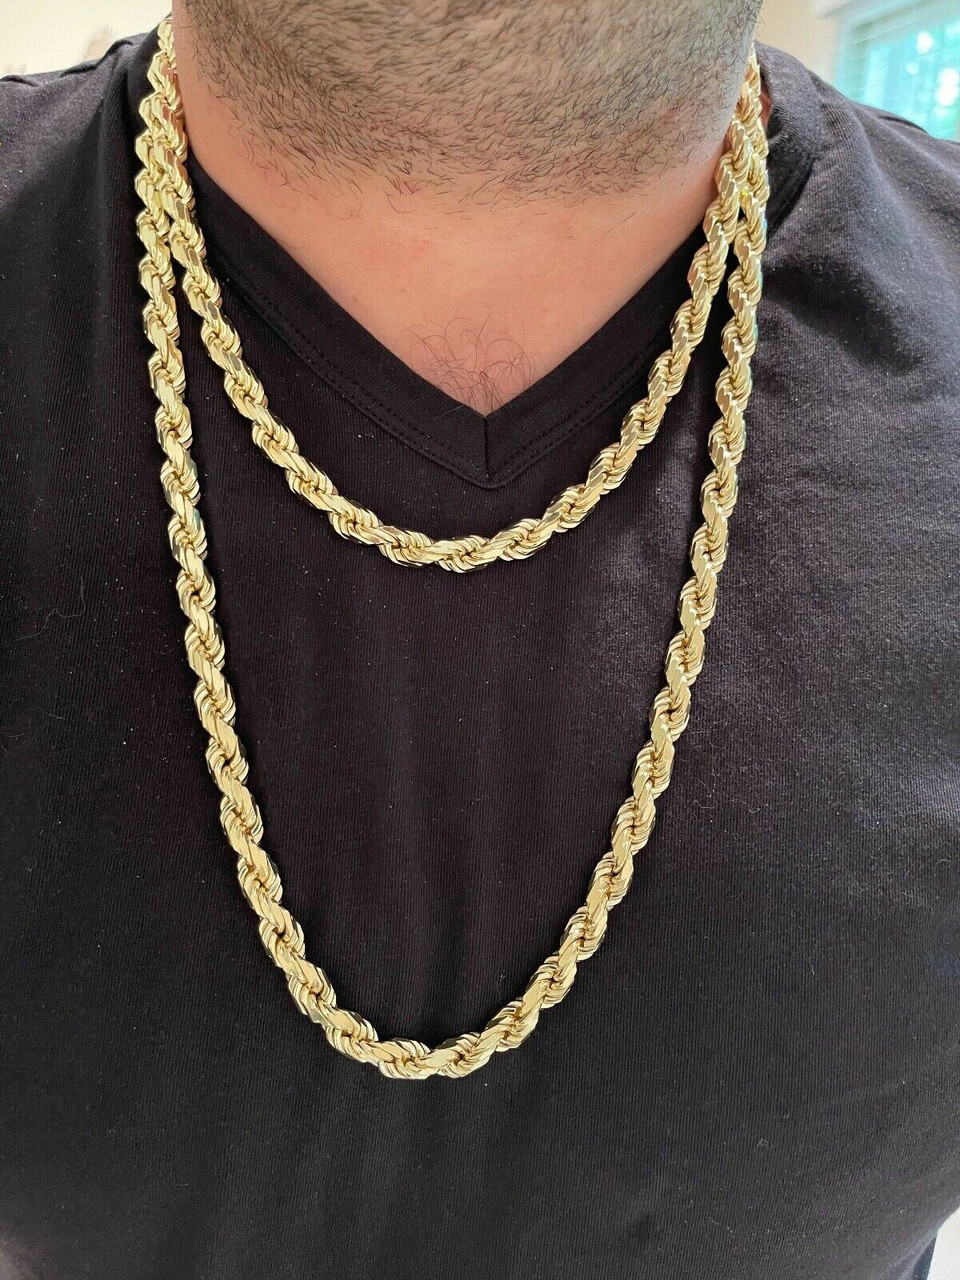 https://cdn11.bigcommerce.com/s-s8inshvd4z/images/stencil/original/products/4658/55809/harlembling-8mm-thick-mens-rope-chain-14k-gold-over-real-solid-925-sterling-silver-necklace__43082.1664374665.jpg?c=2